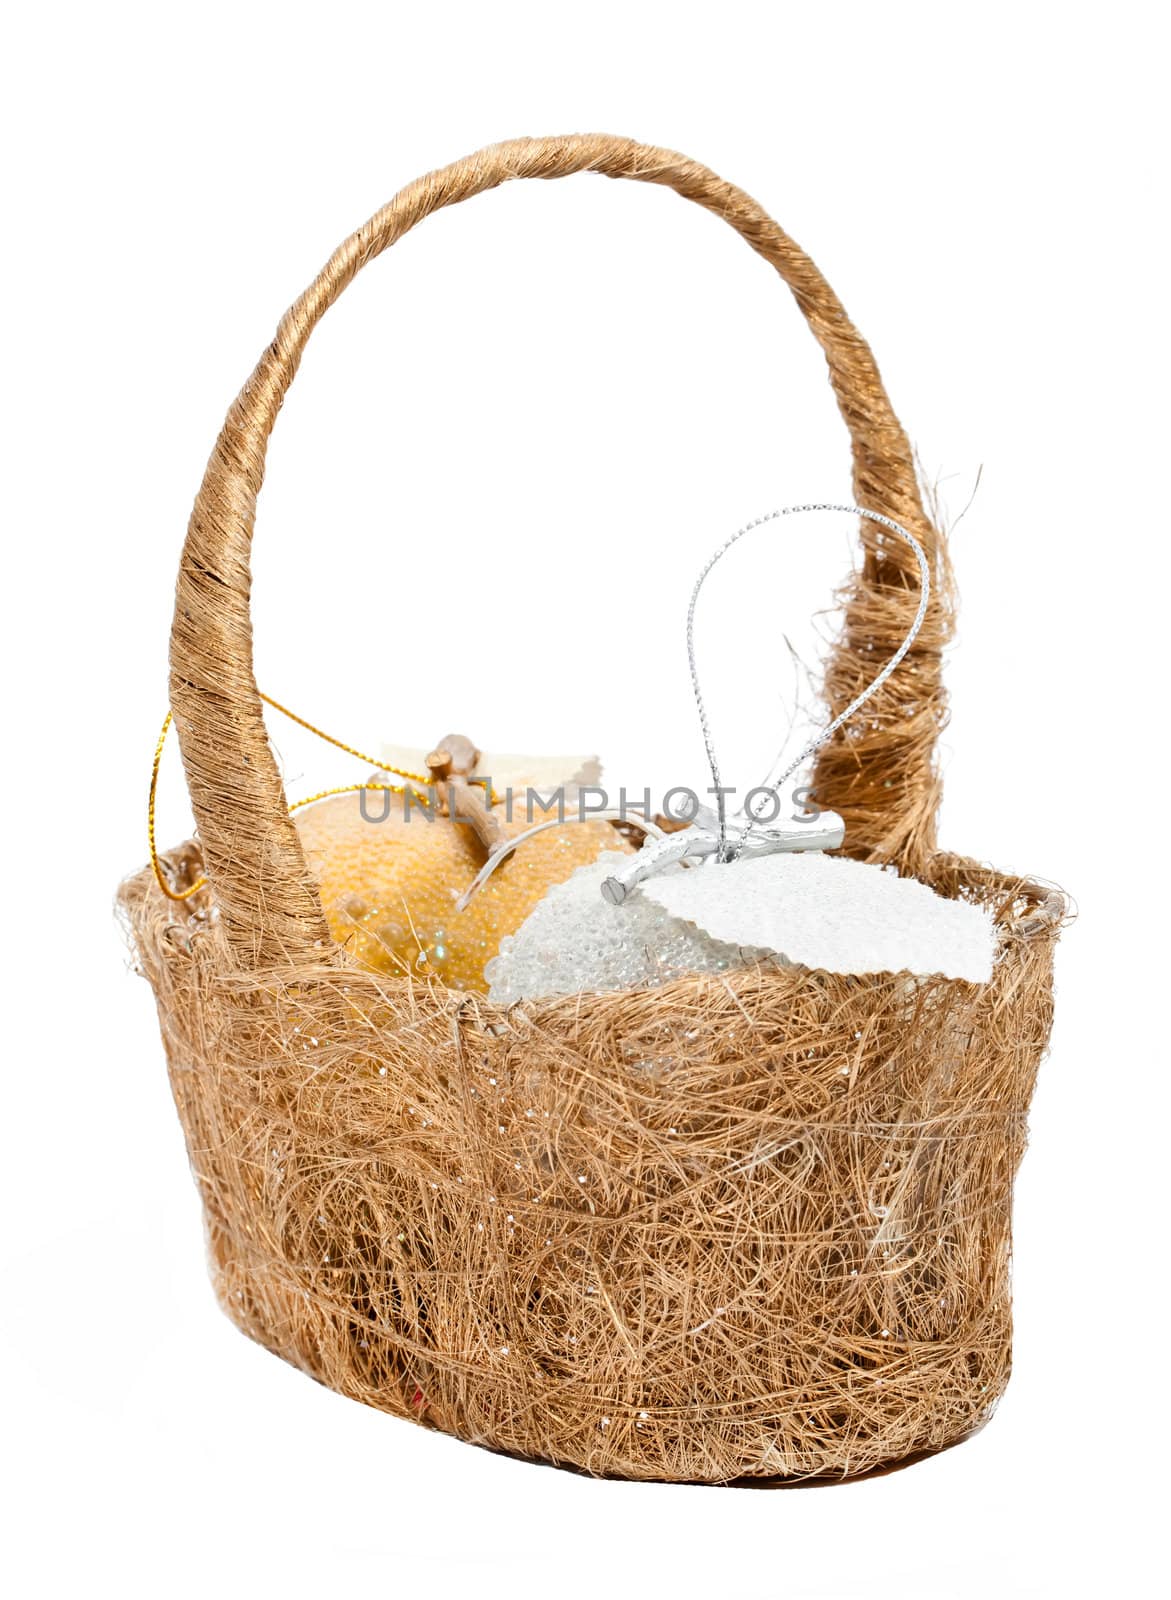 Christmas decoration basket with golden and silver apples